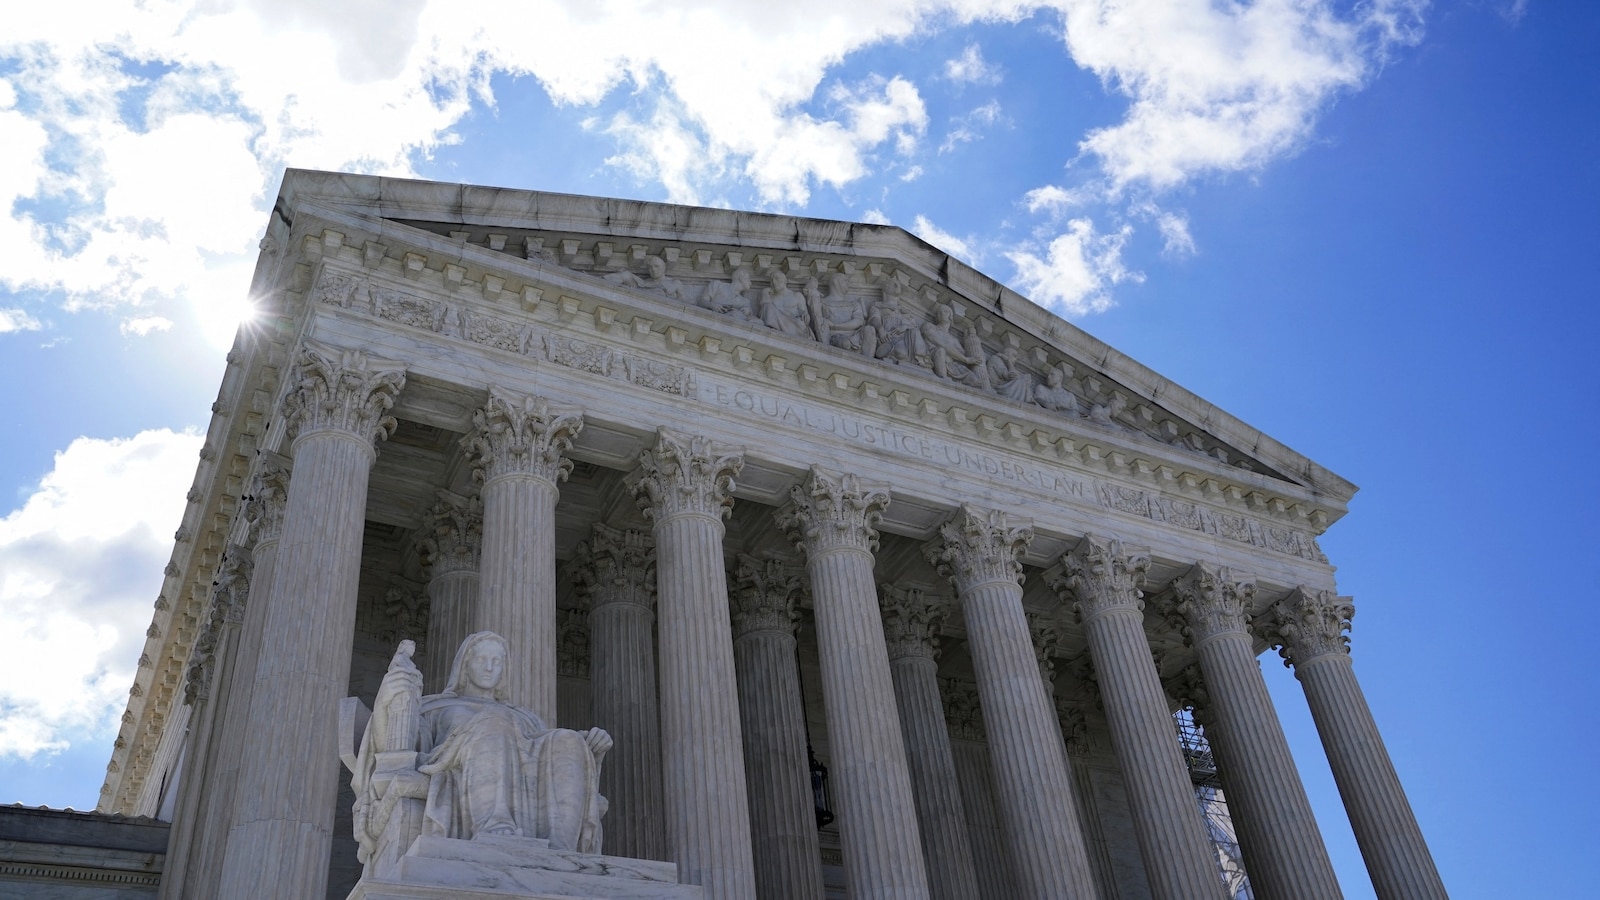 Supreme Court poised to issue major rulings on presidential immunity, abortion access